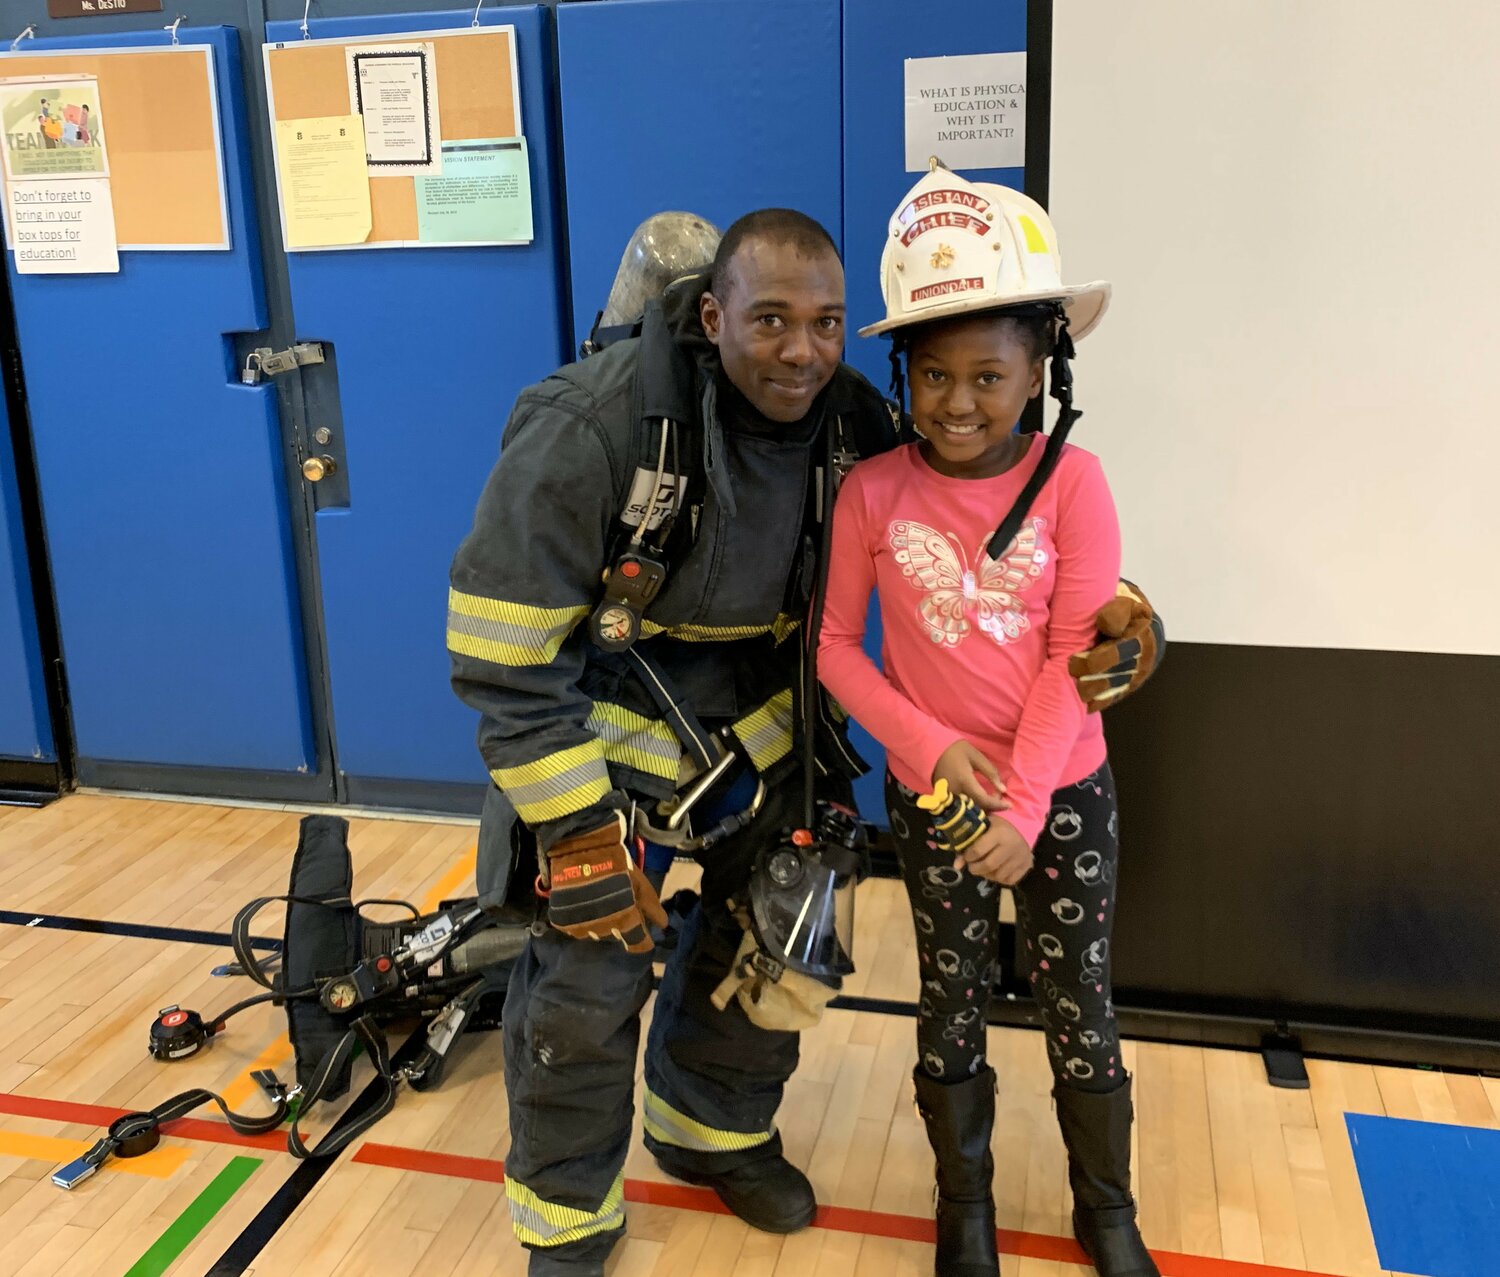 Ex-Chief and current Lieutenant Avril Ashley gave his daughter May, then 6 years old, a taste of wearing a firefighter’s uniform. Lt. Ashley has been with the Uniondale Fire Department for 17 years.